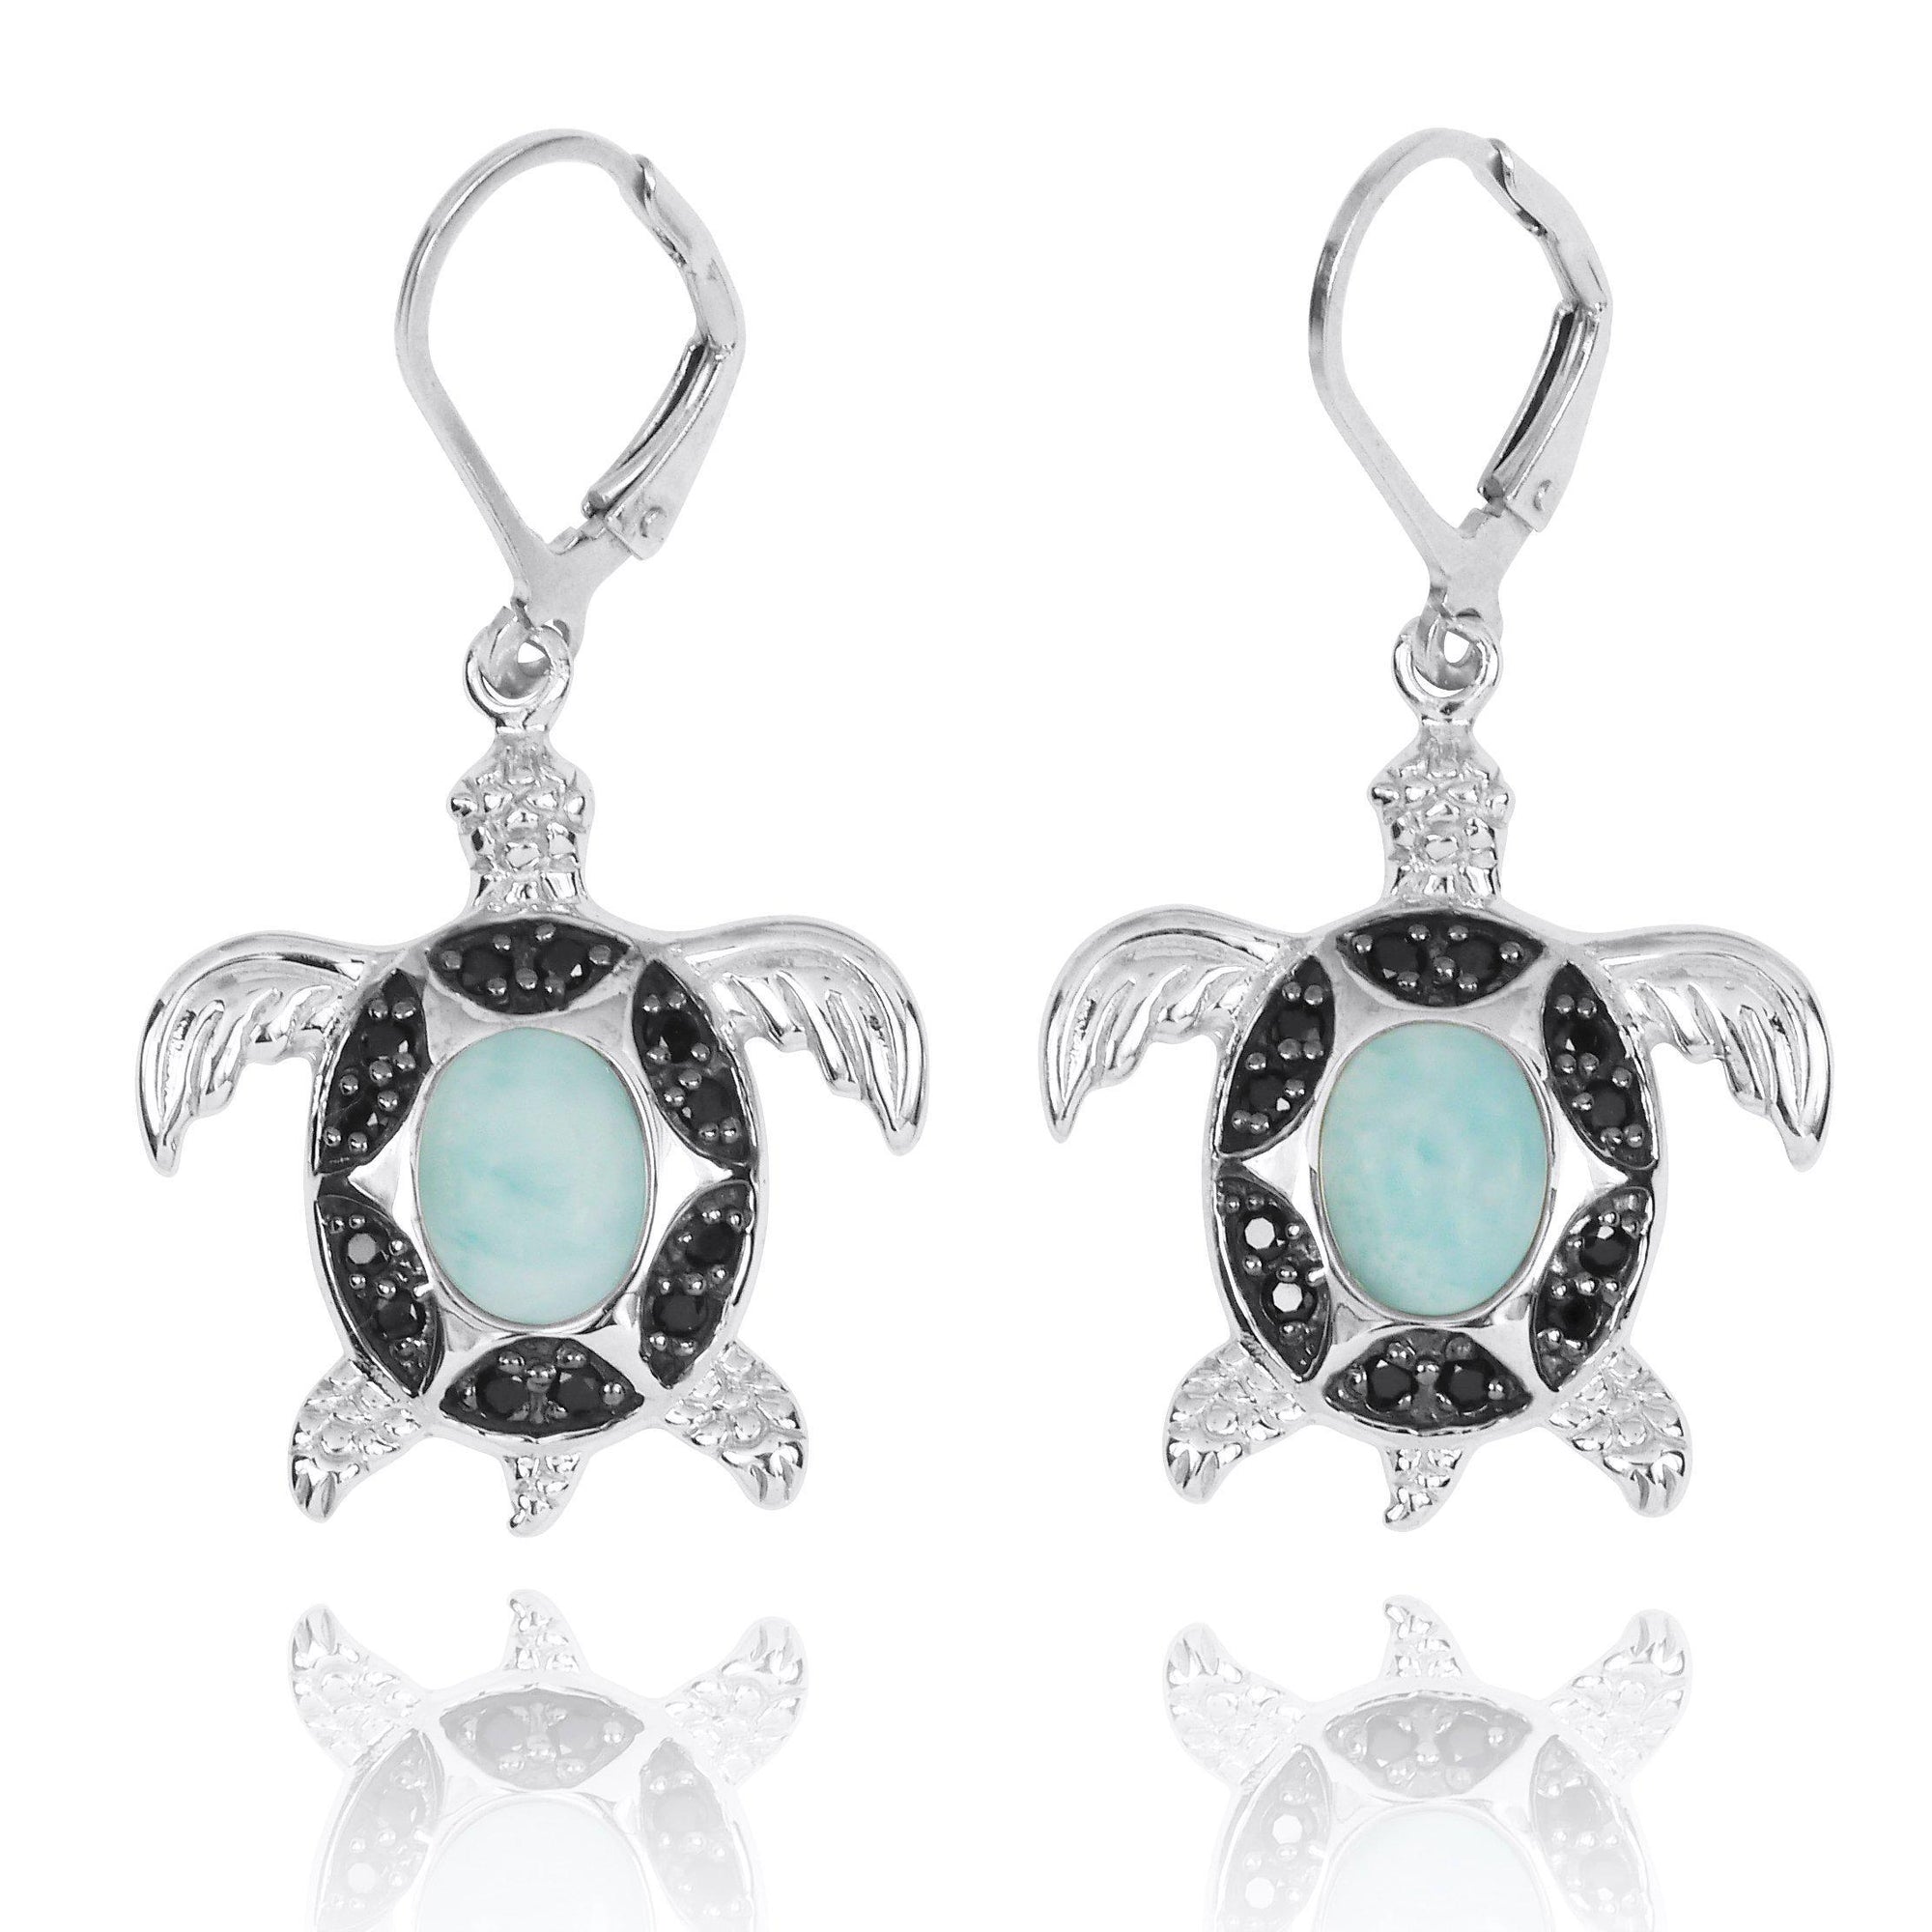 Sea Turtle Earrings with Larimar and Black Spinel